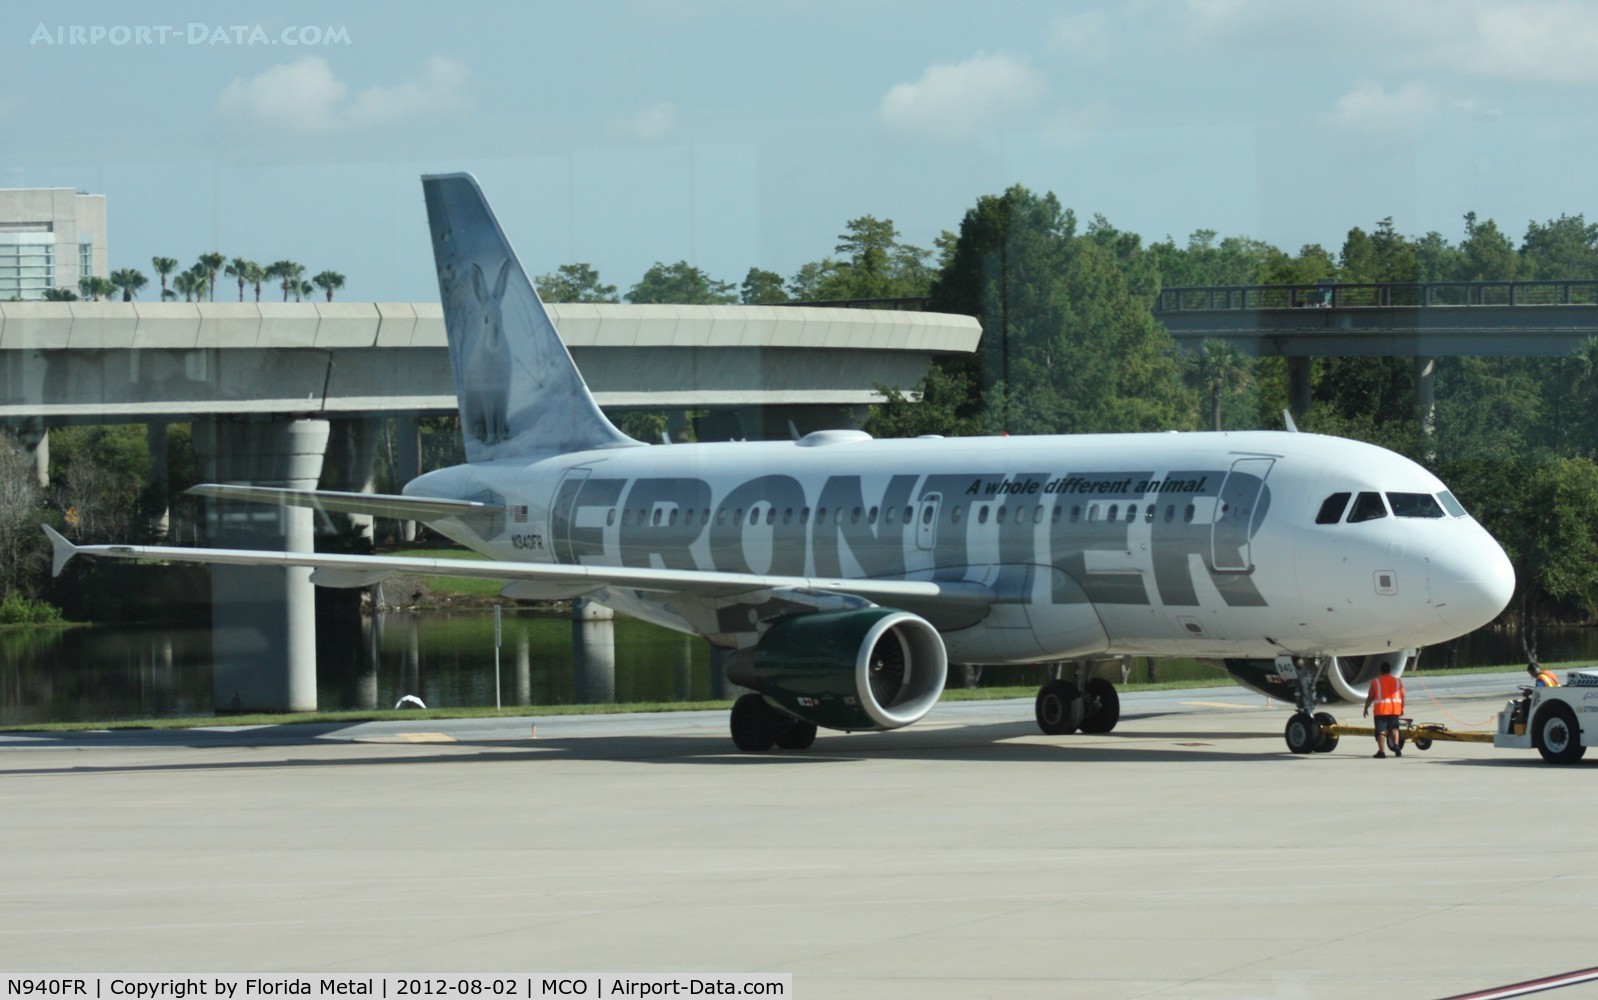 N940FR, 2005 Airbus A319-111 C/N 2465, Jack the Snowshoe Hair Frontier A310